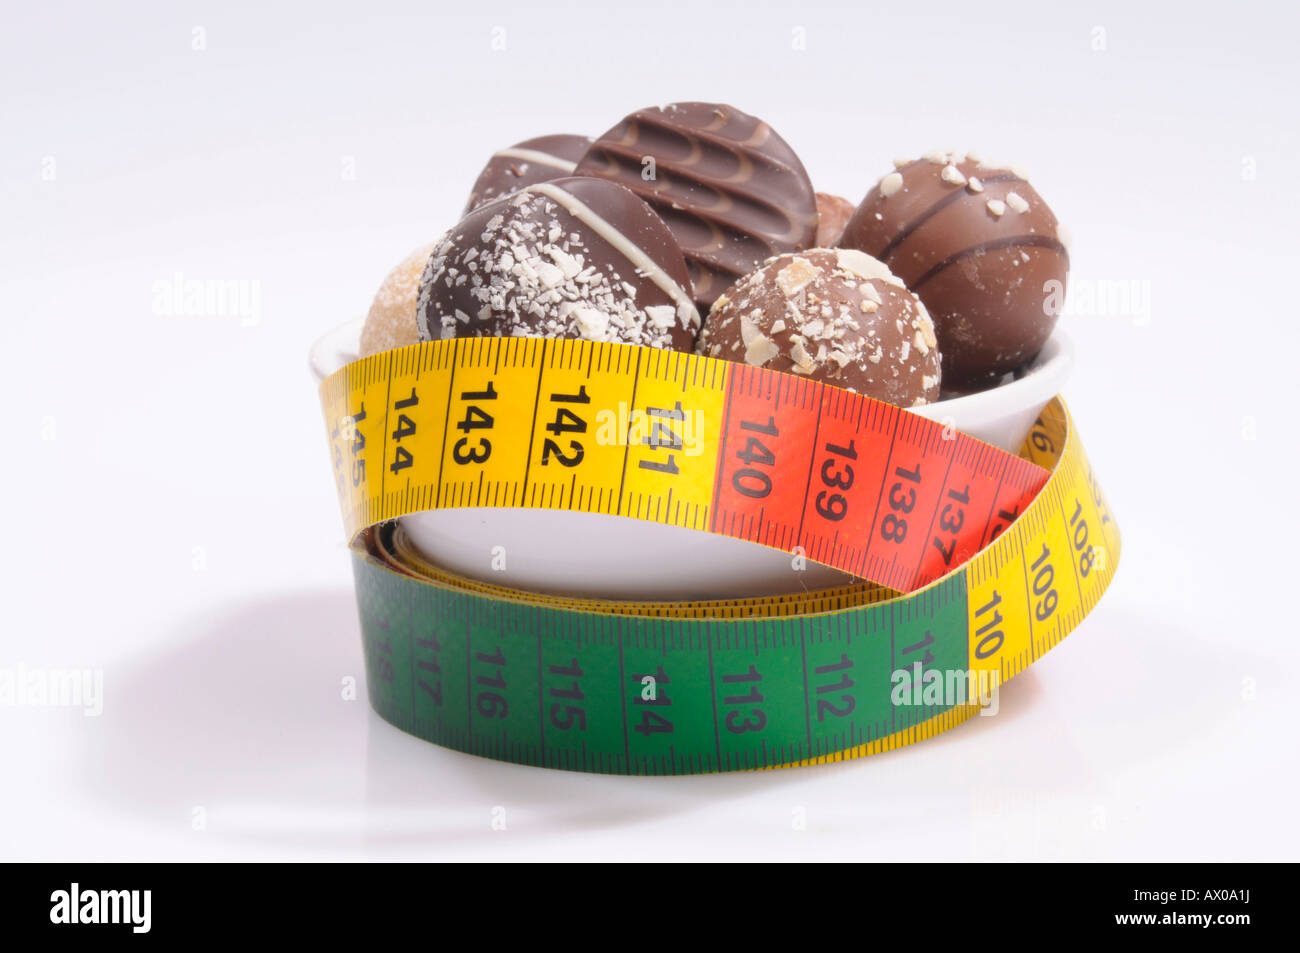 Chocolate pralines and a measuring tape Stock Photo